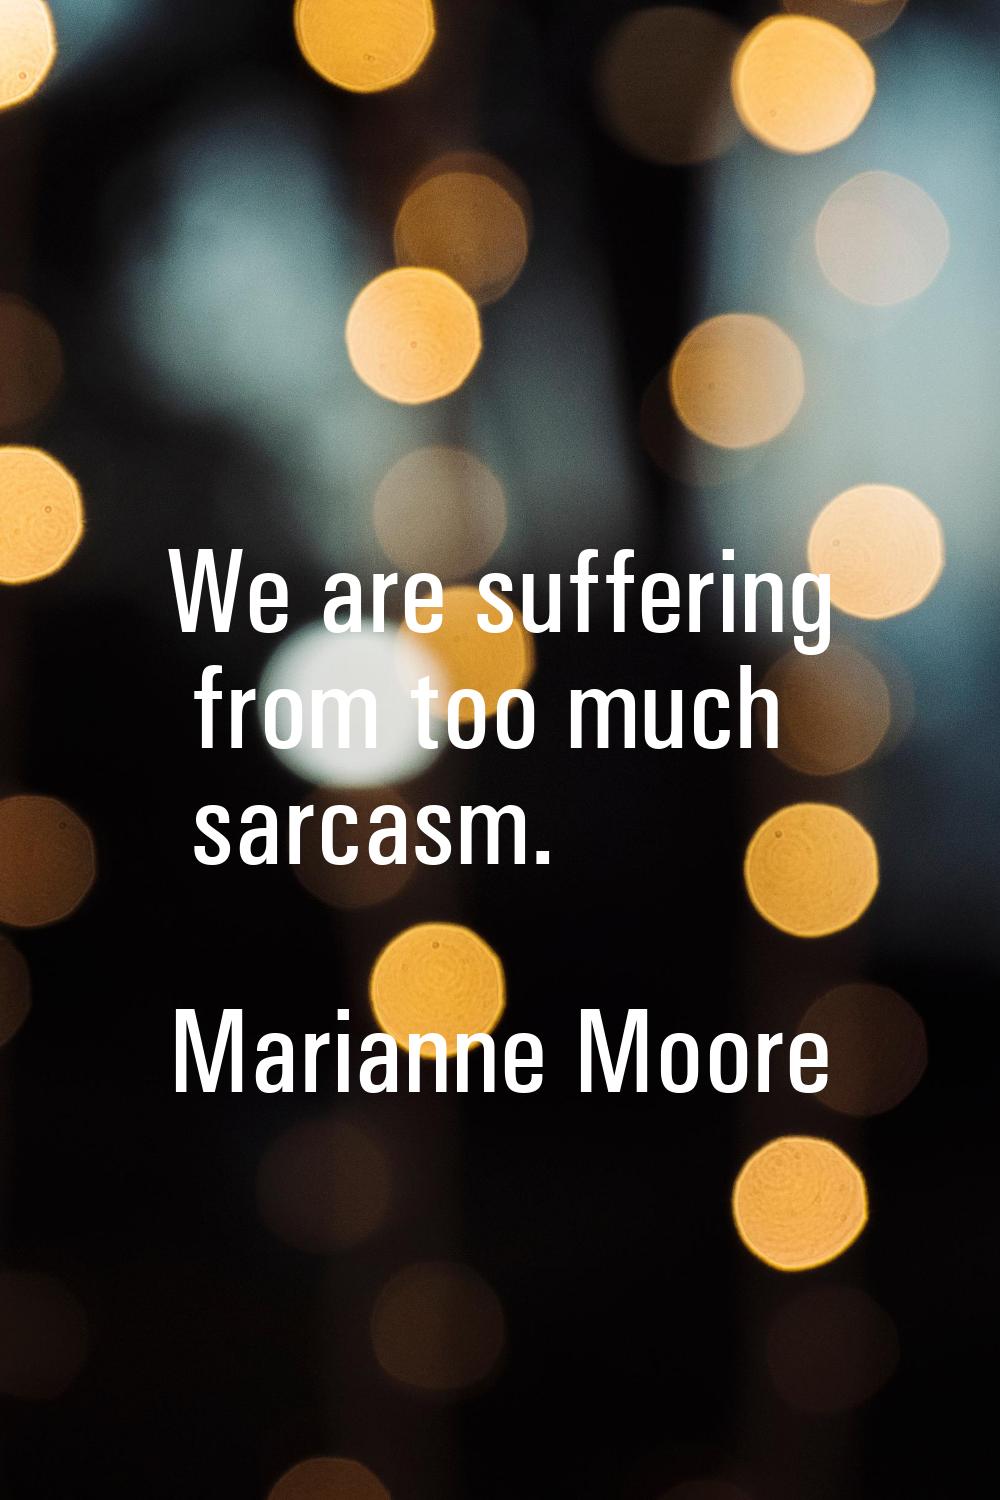 We are suffering from too much sarcasm.